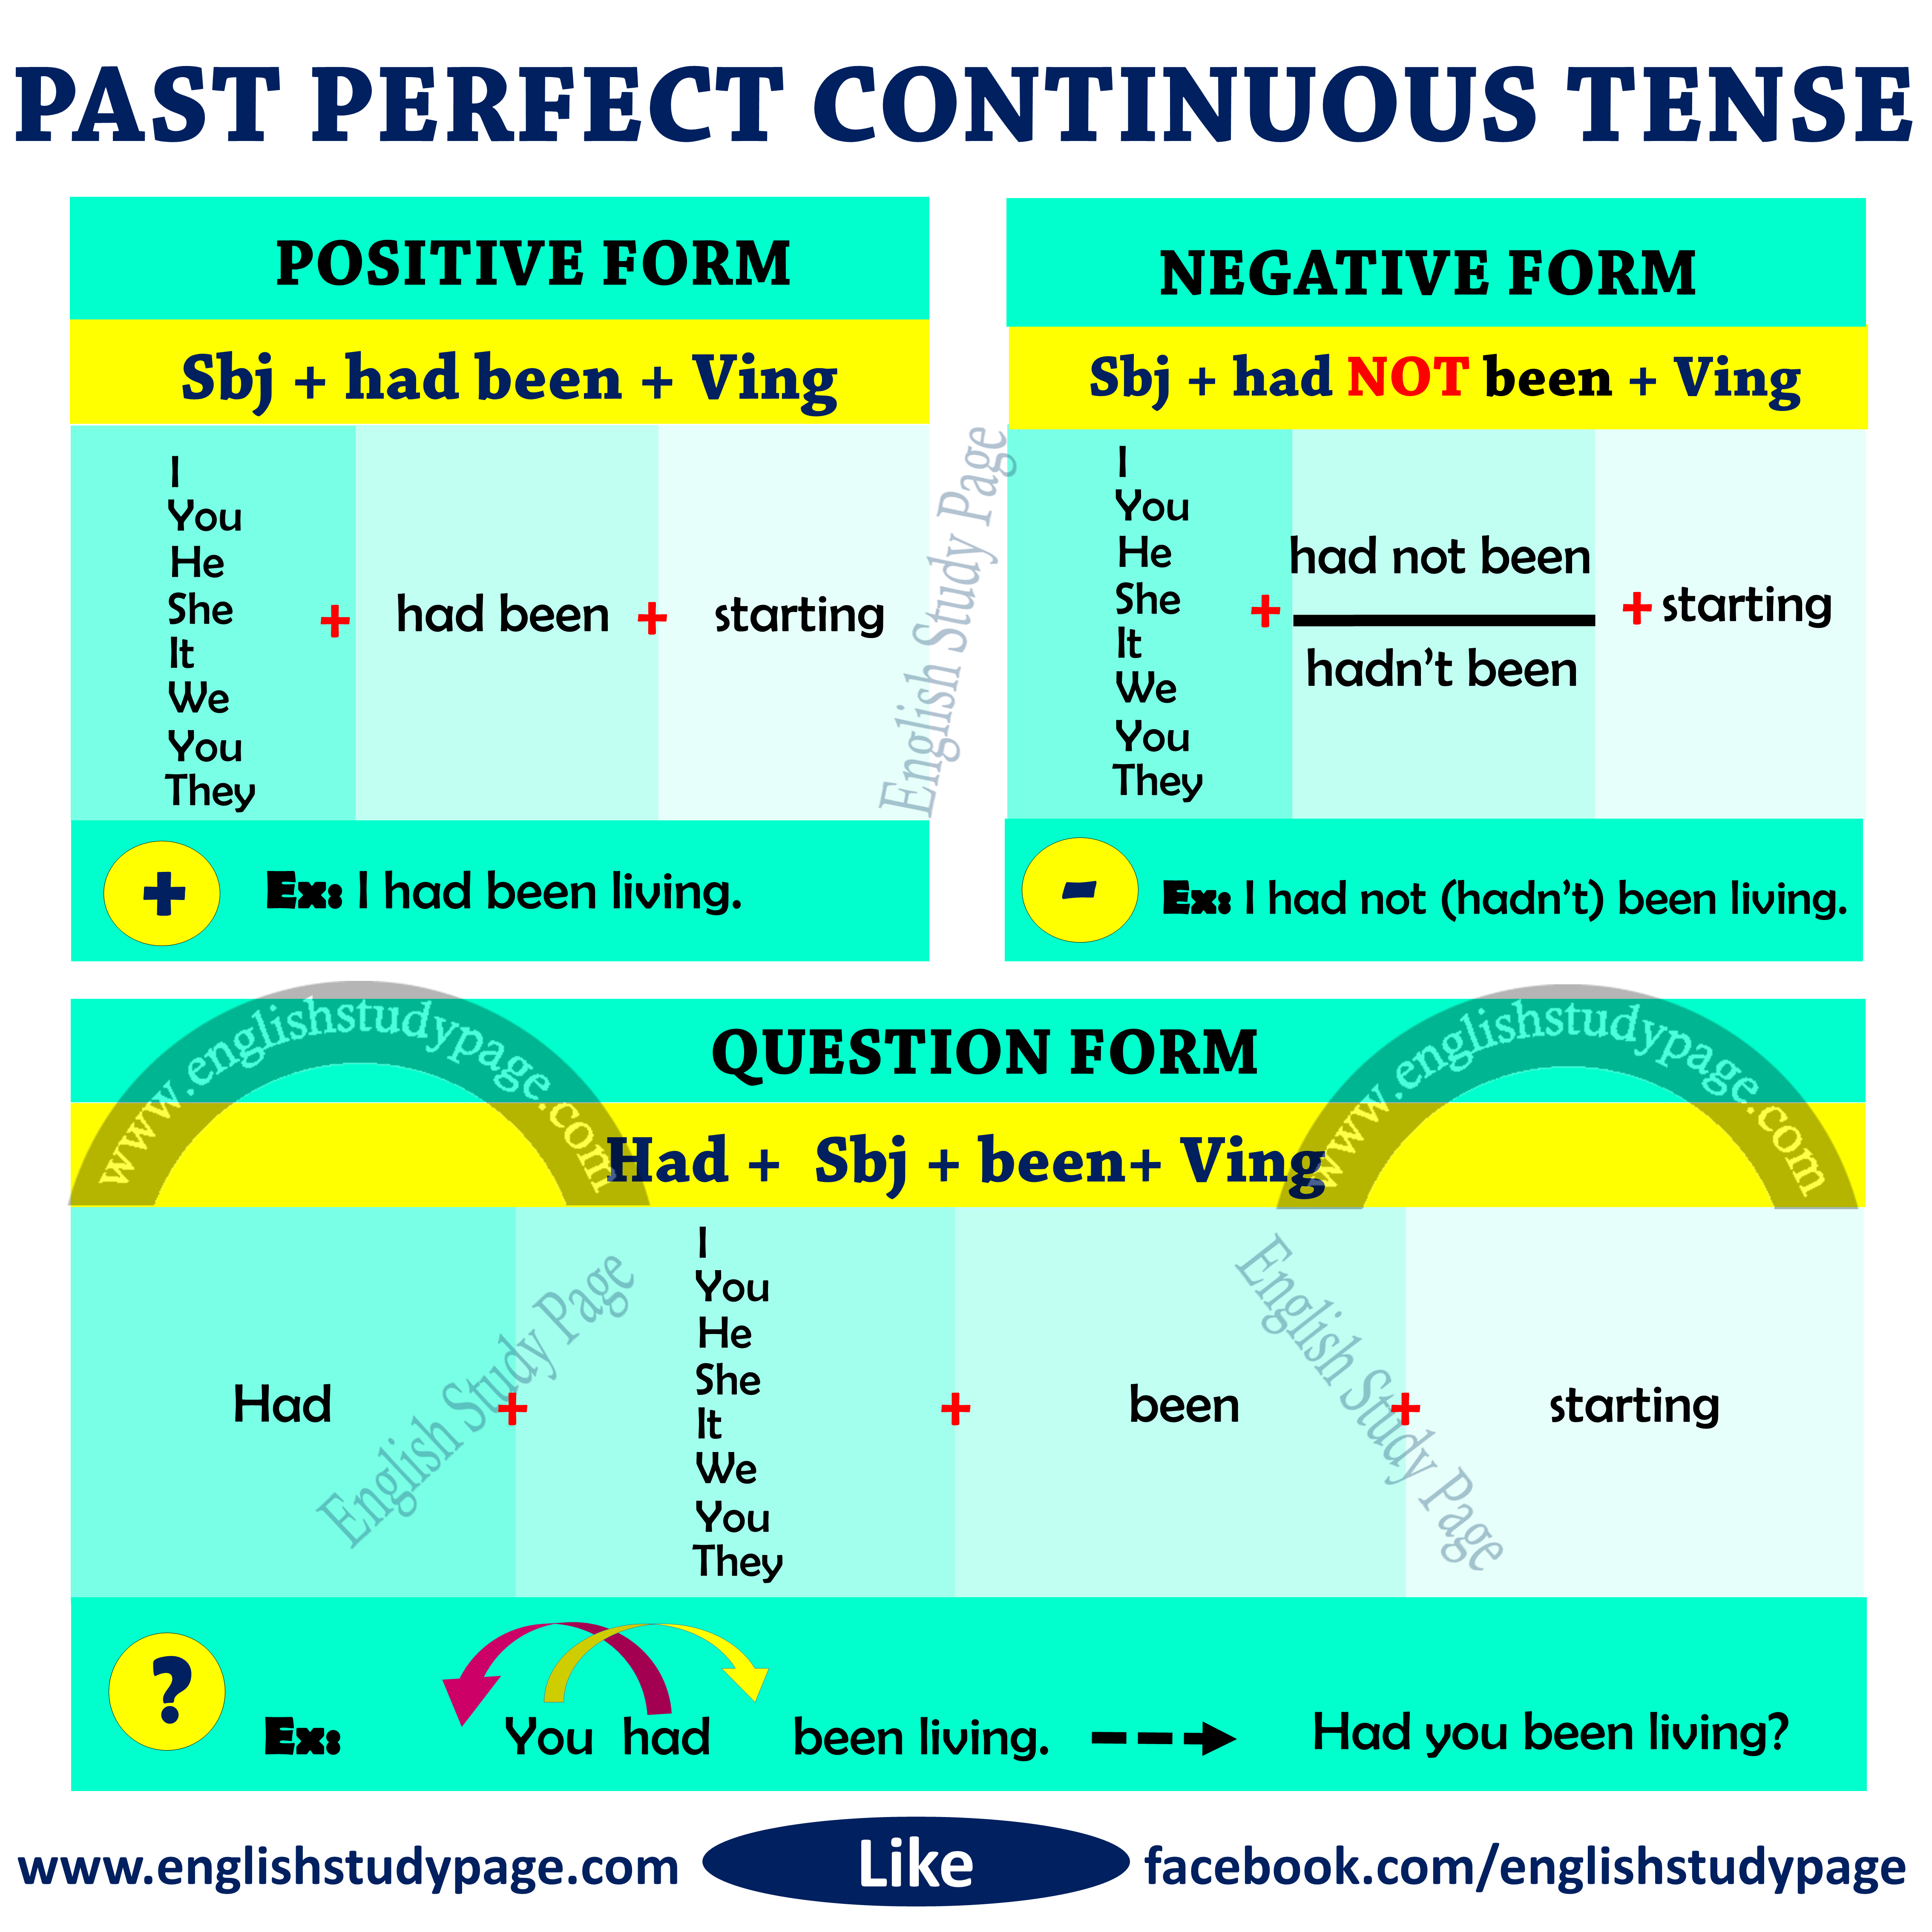 Structure of Past Perfect Continuous Tense